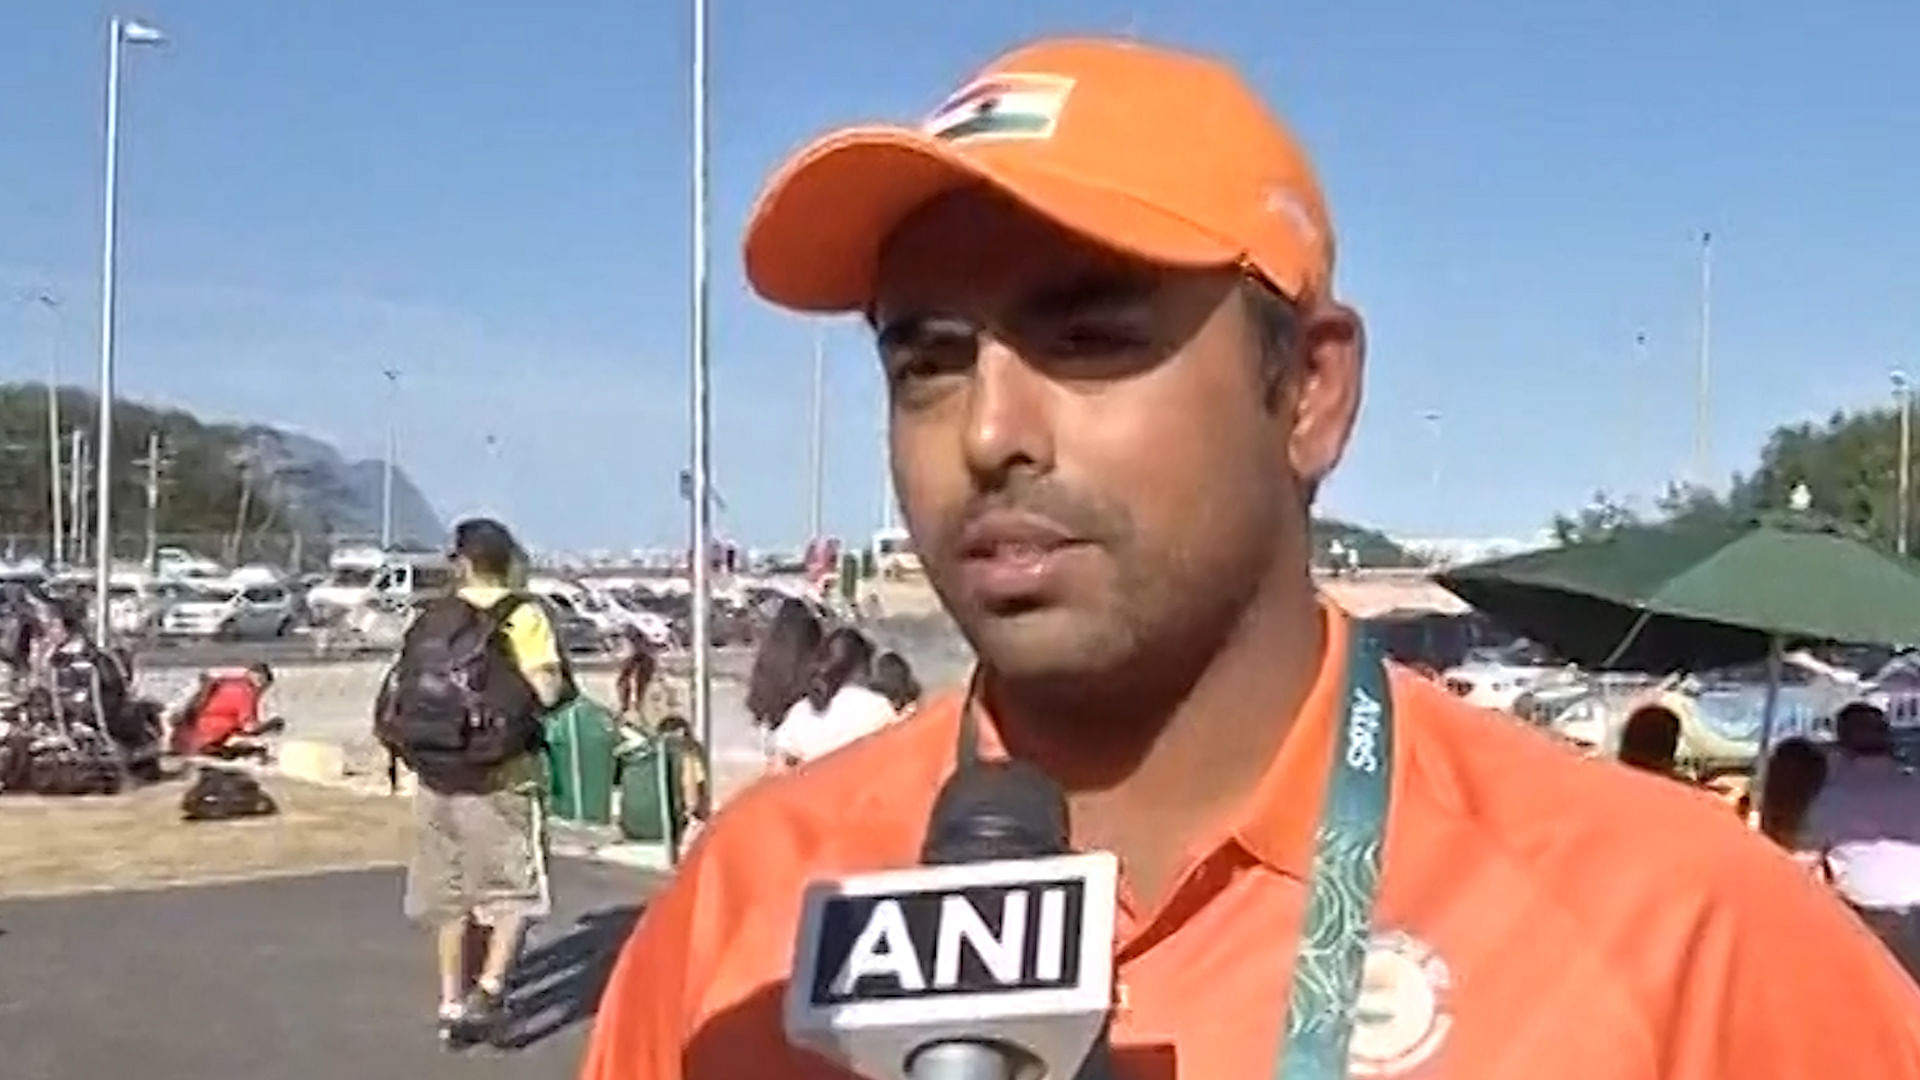 Golfer Anirban Lahiri place tied at 51 after the second round at Rio (Photo: ANI Screengrab)